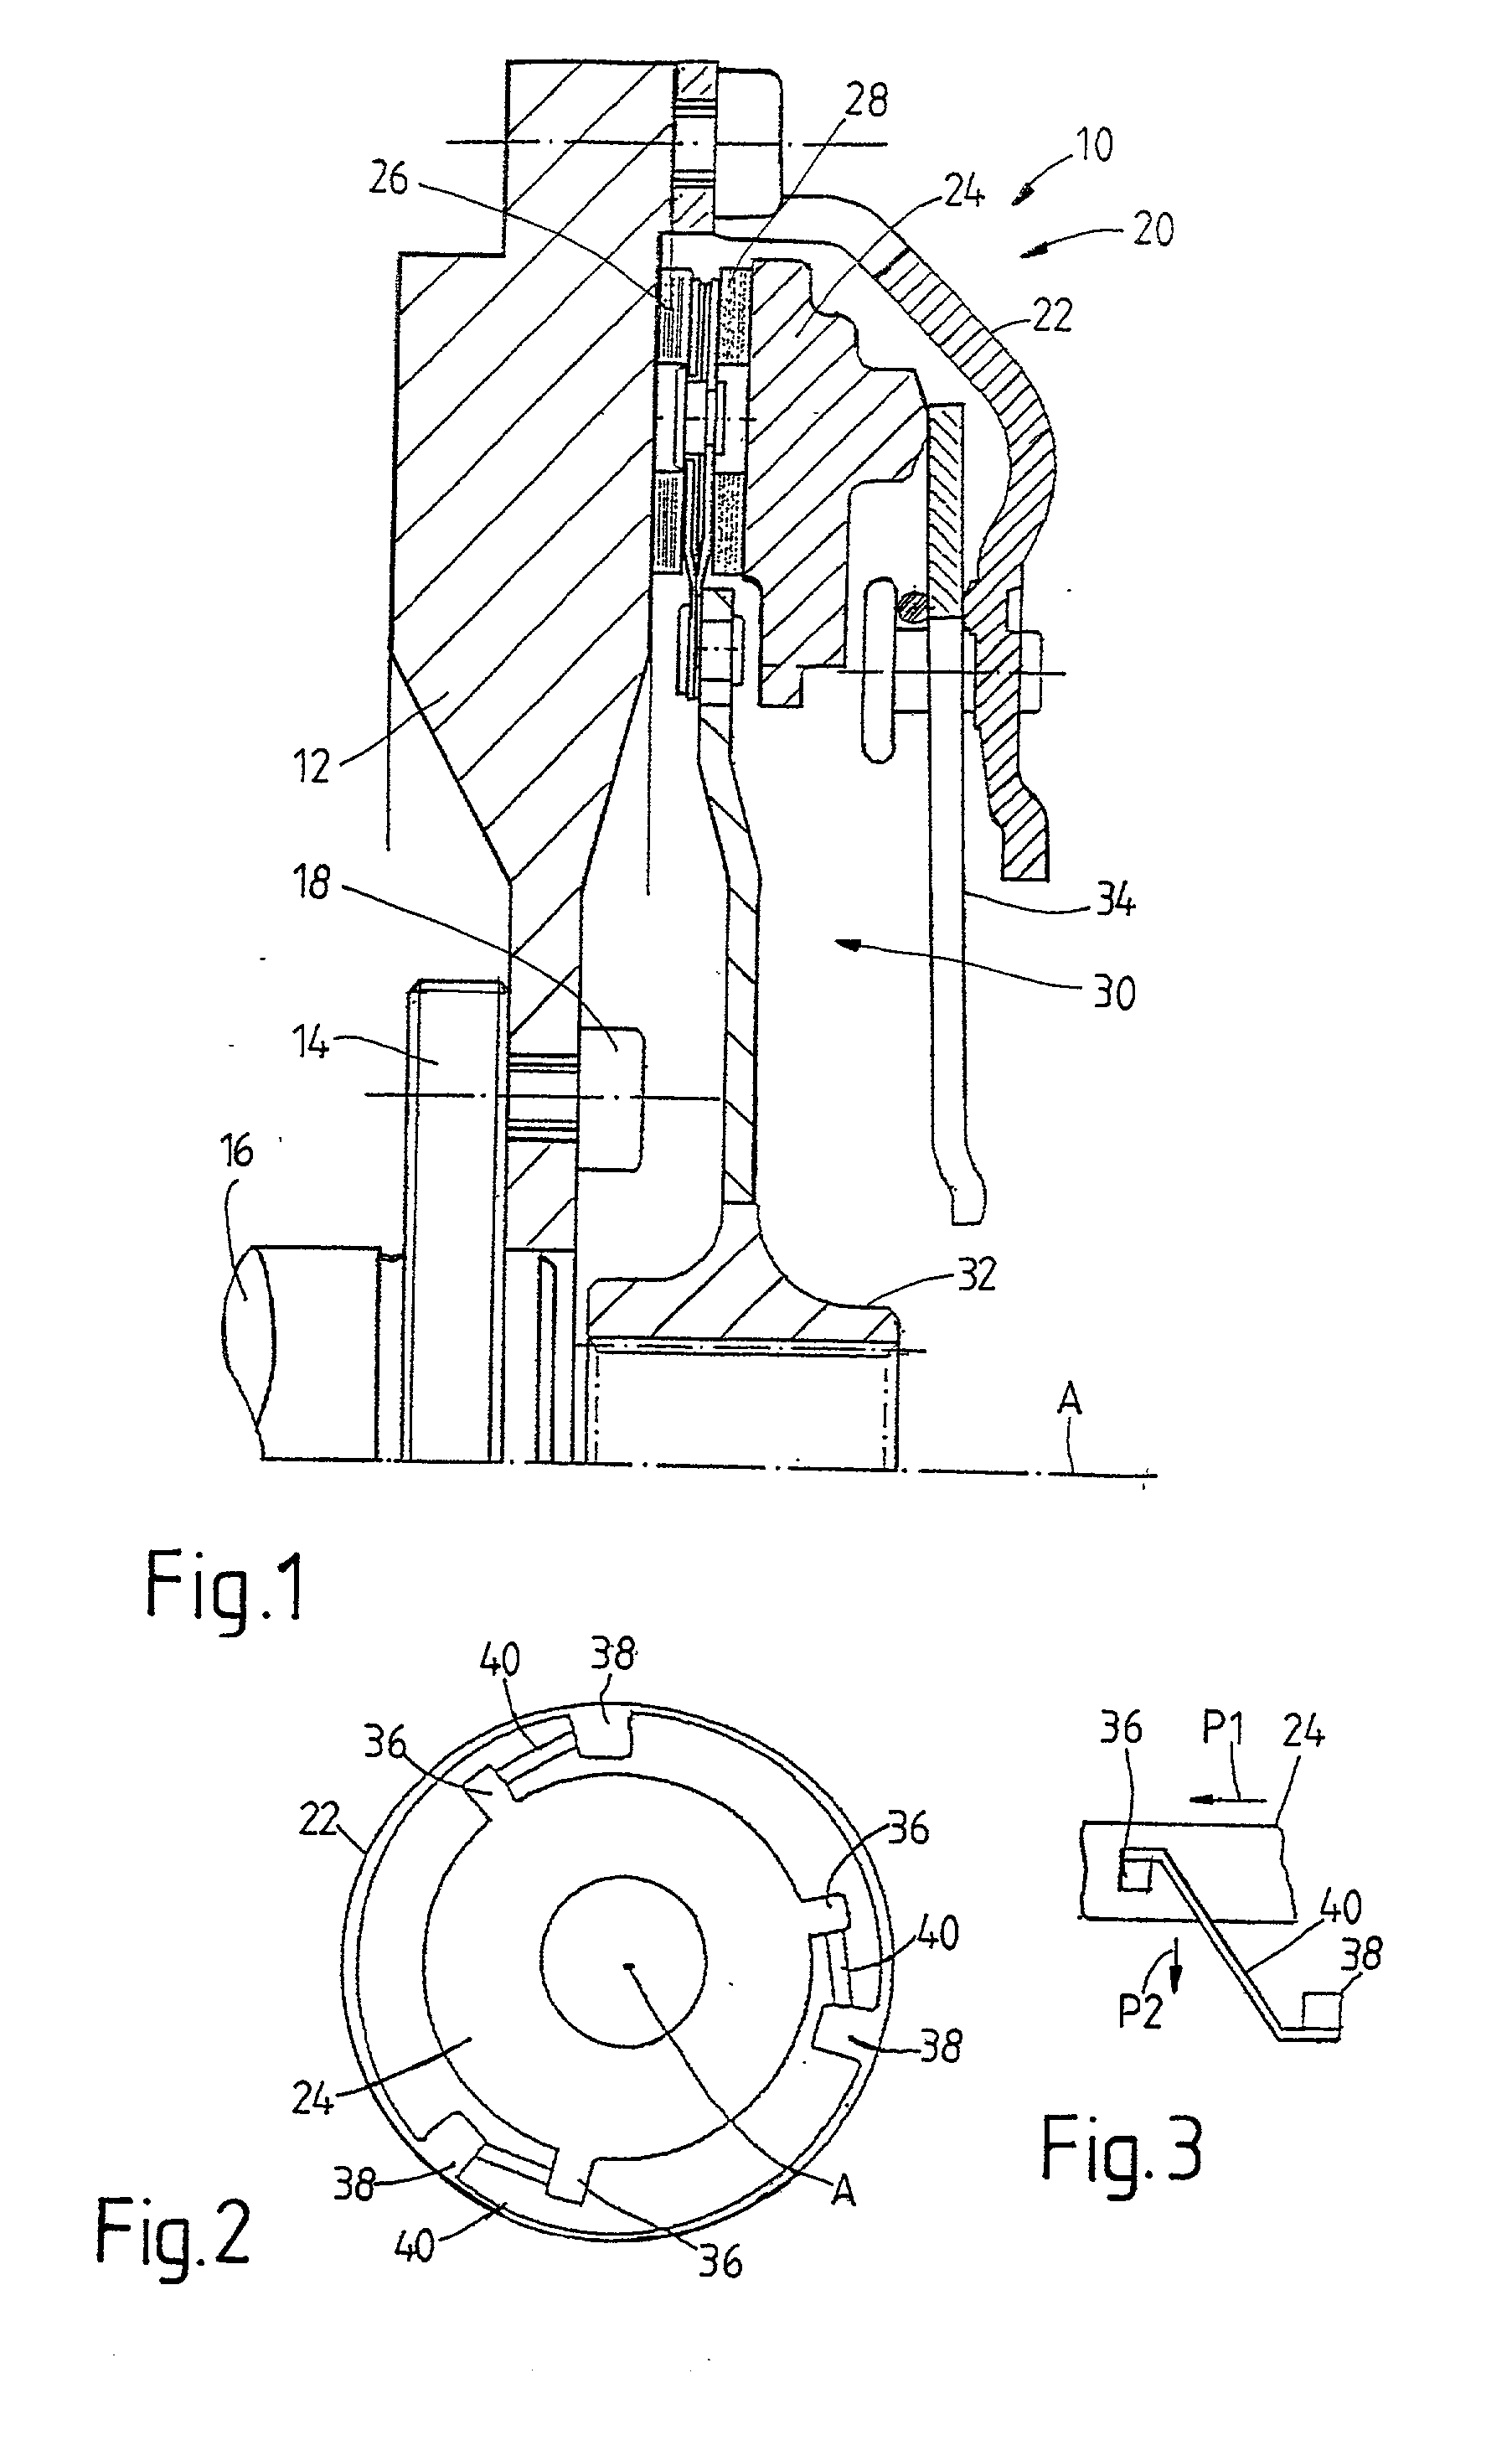 Thrust plate assembly